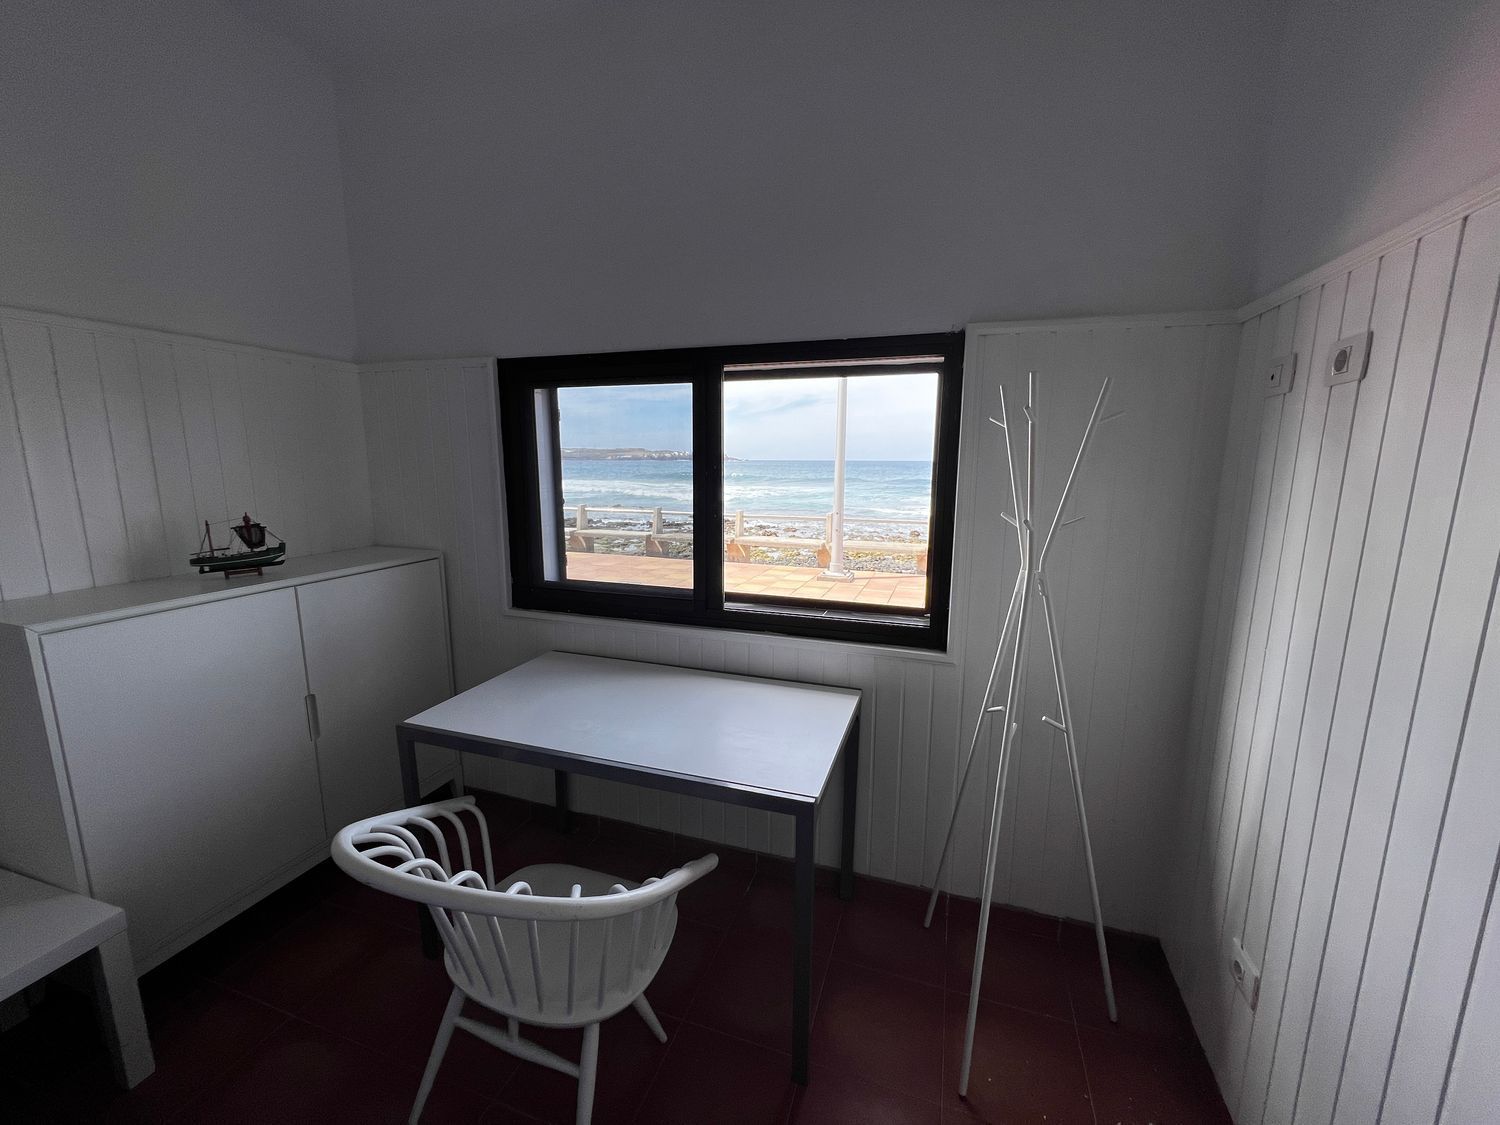 Xalet flat for sale by the sea in Galdar, Gran Canària, Spain